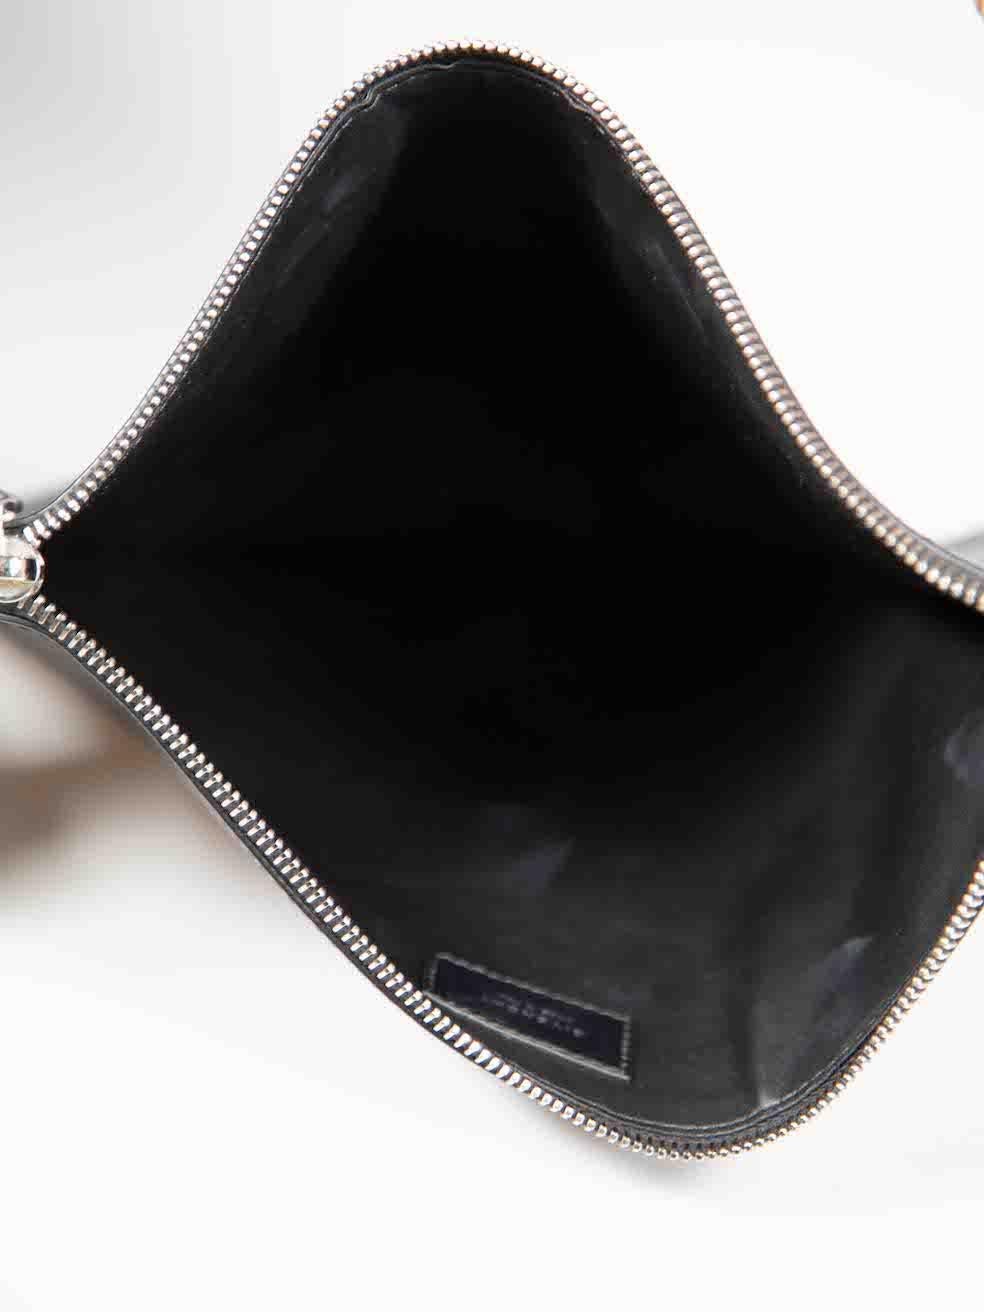 Givenchy Black Leather Graphic Printed Zip Clutch For Sale 1